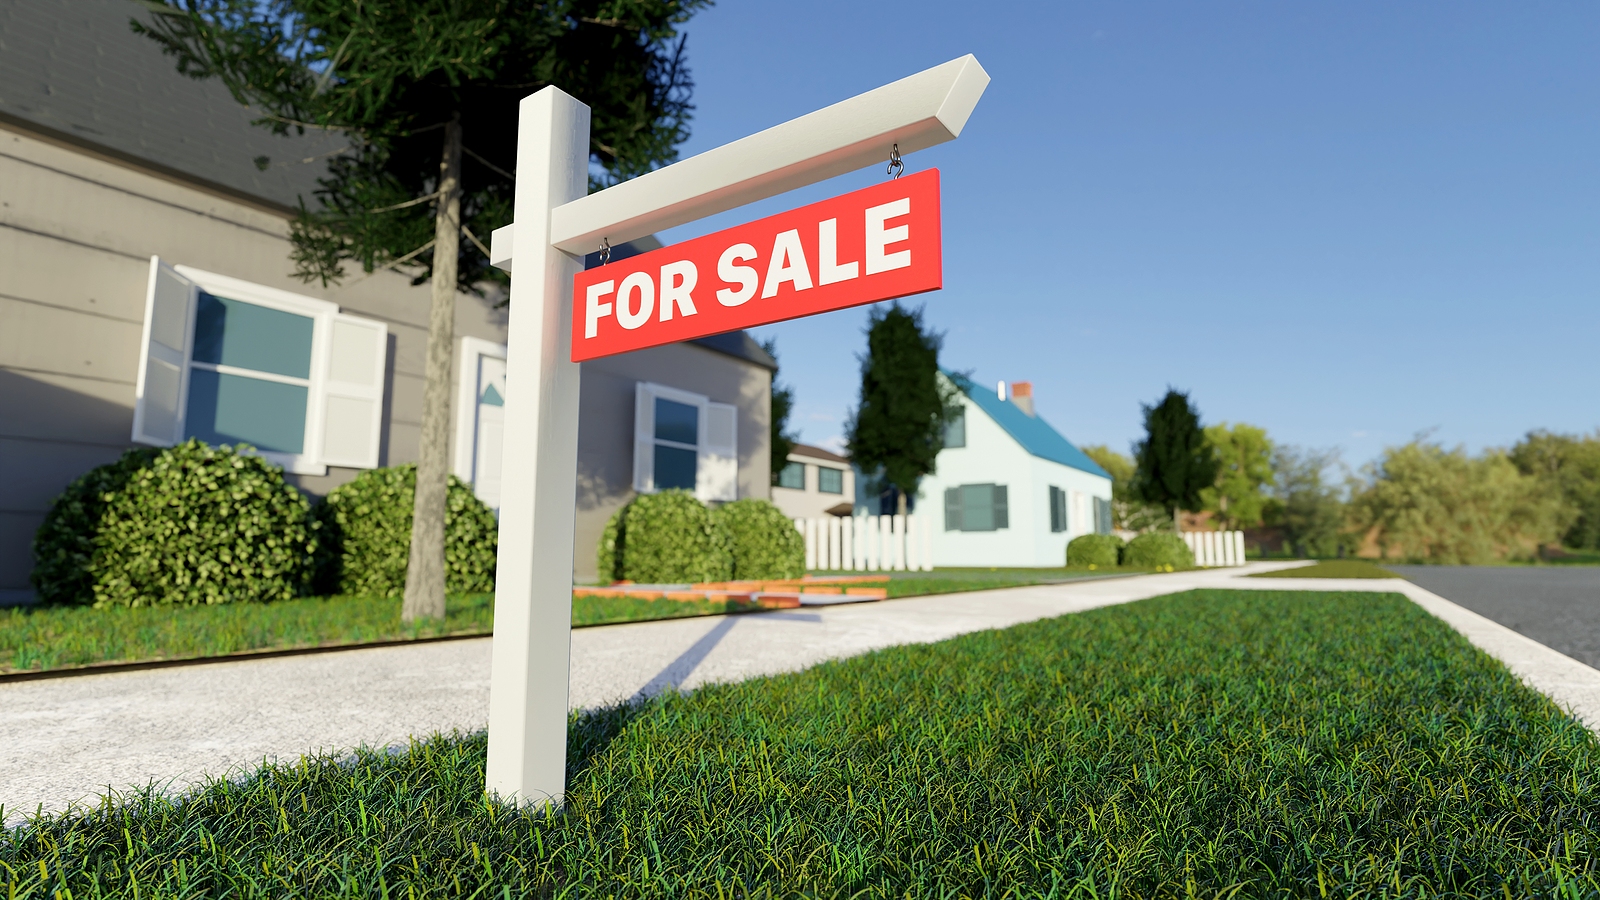 When Shopping For A New Home, Consider Location Carefully